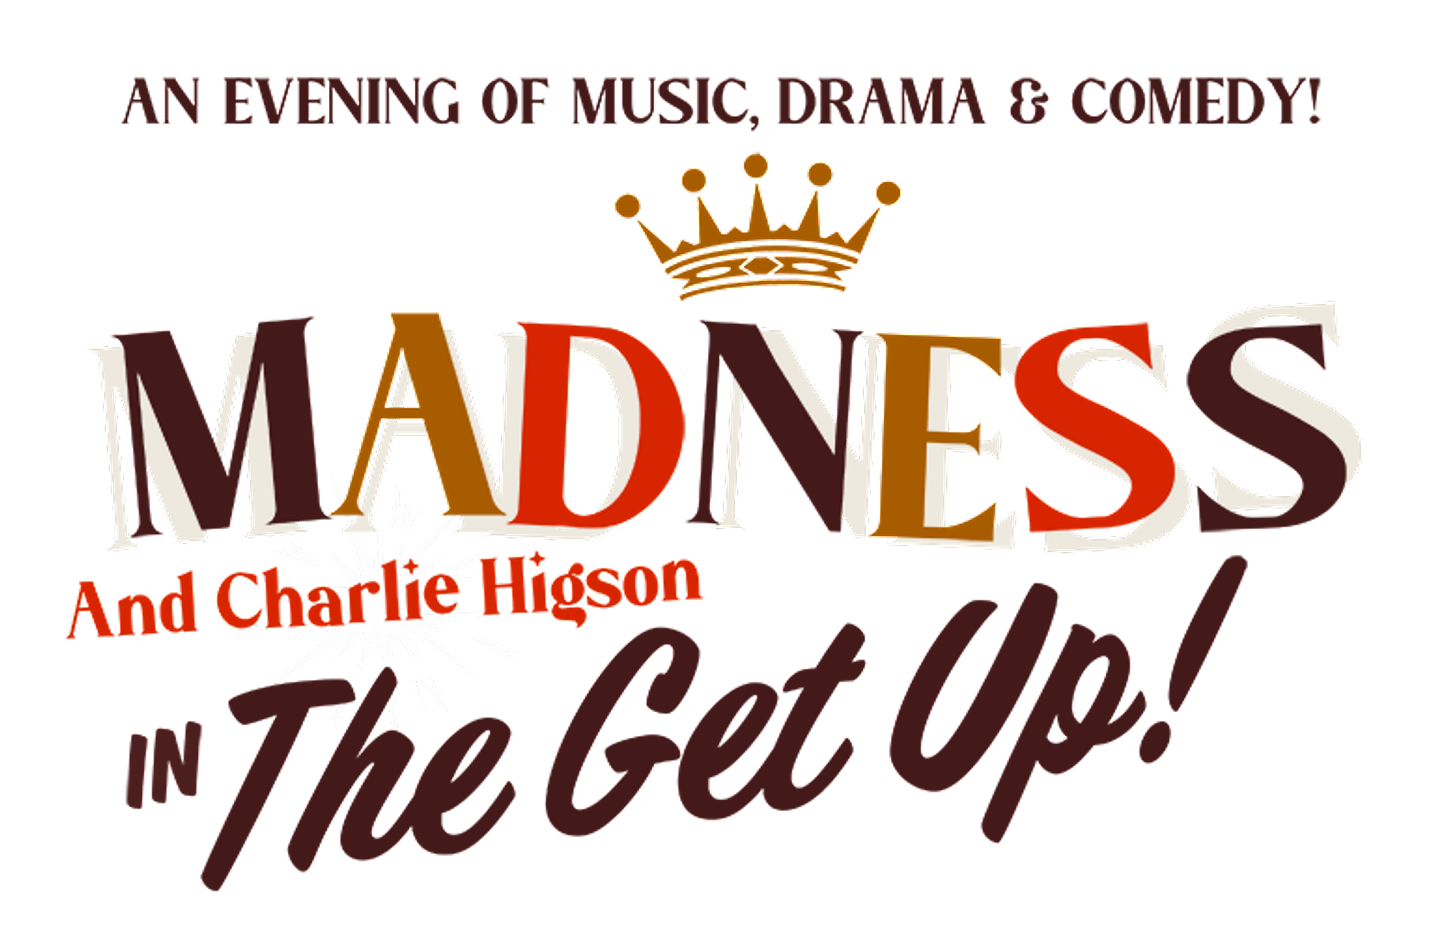 Madness in 'The Get Up!' at the London Palladium